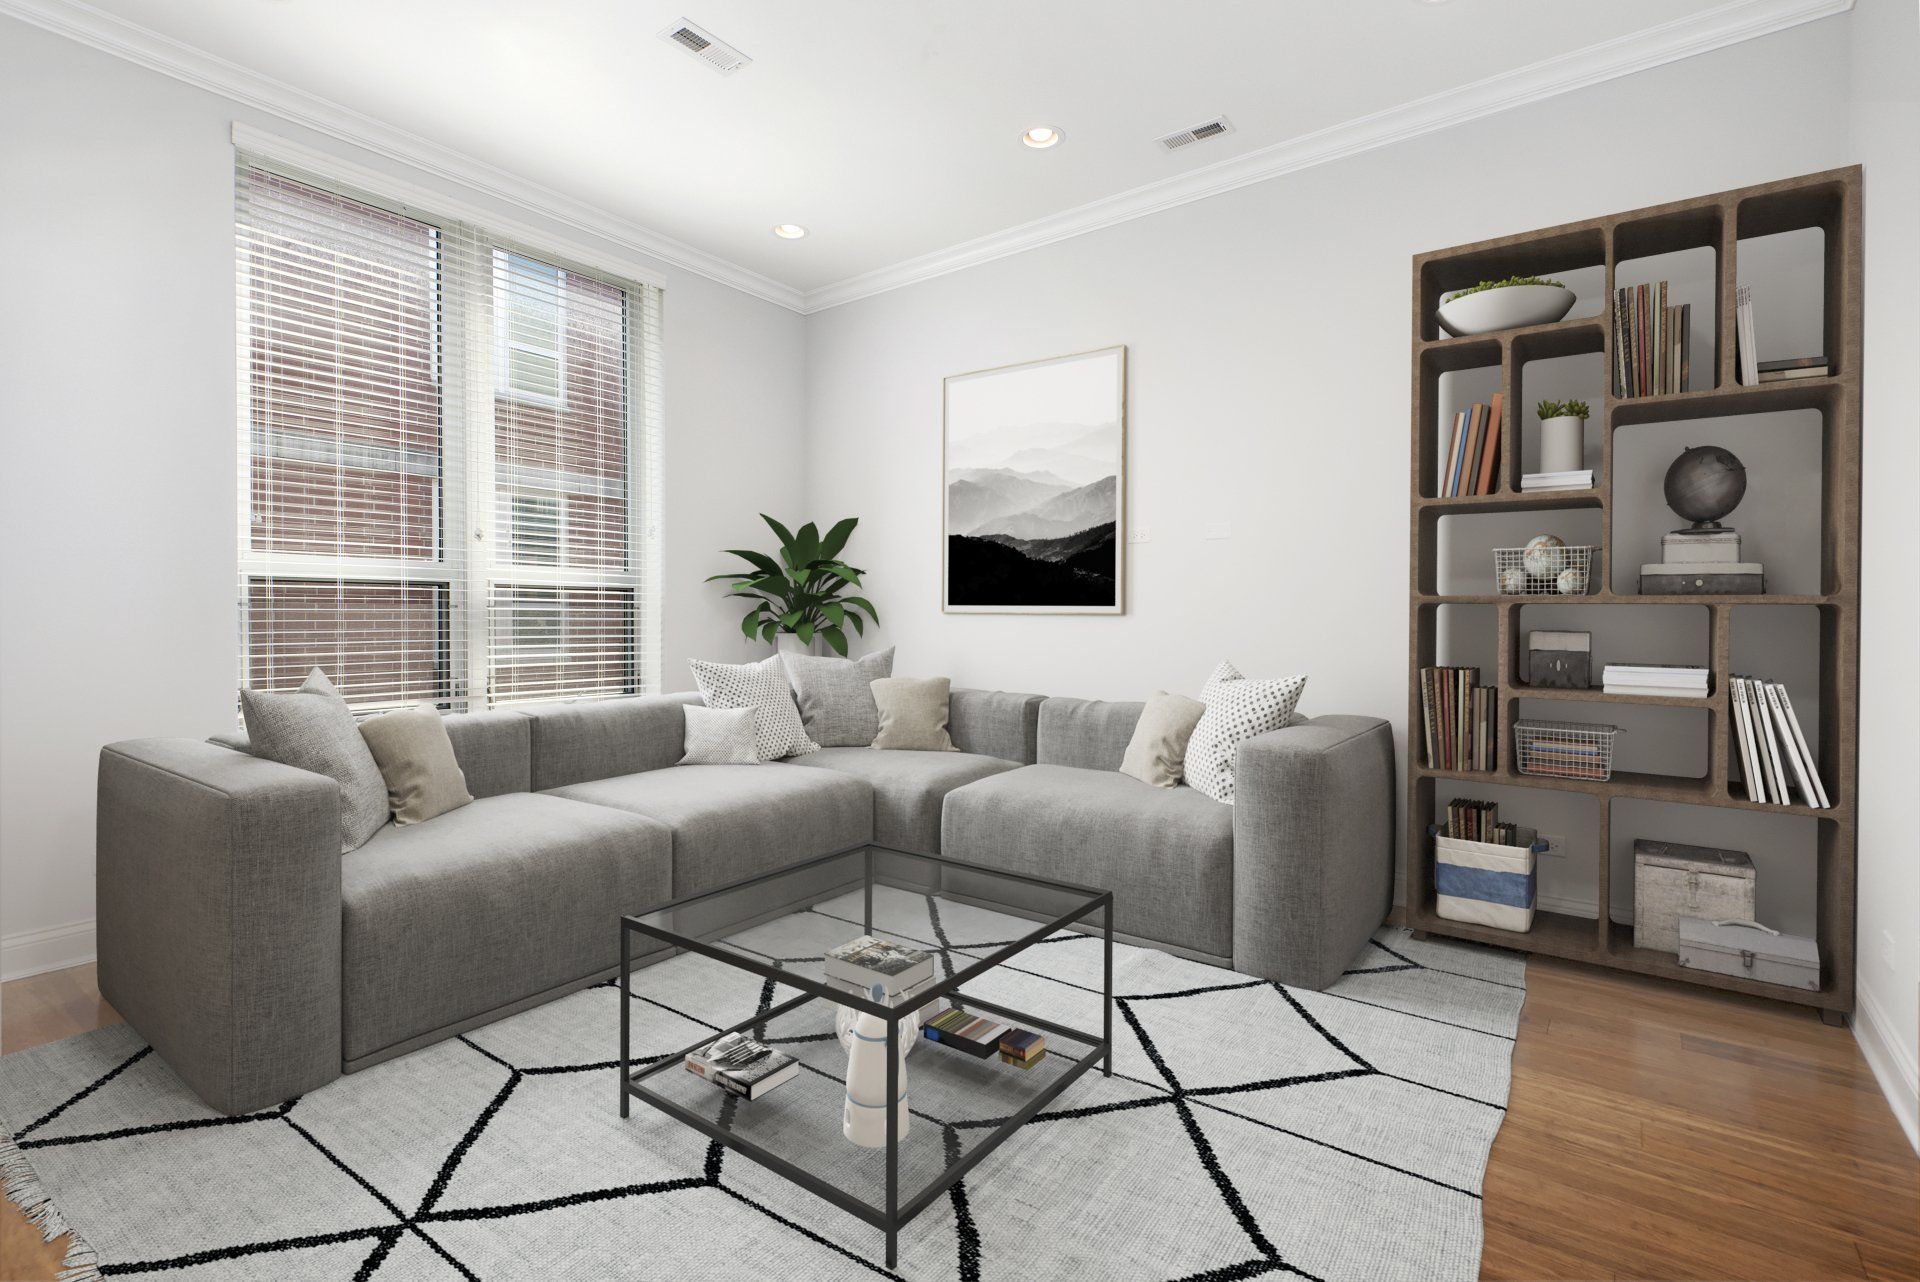 A living room with two couches, a coffee table, and a bookshelf at Reside on Jackson.